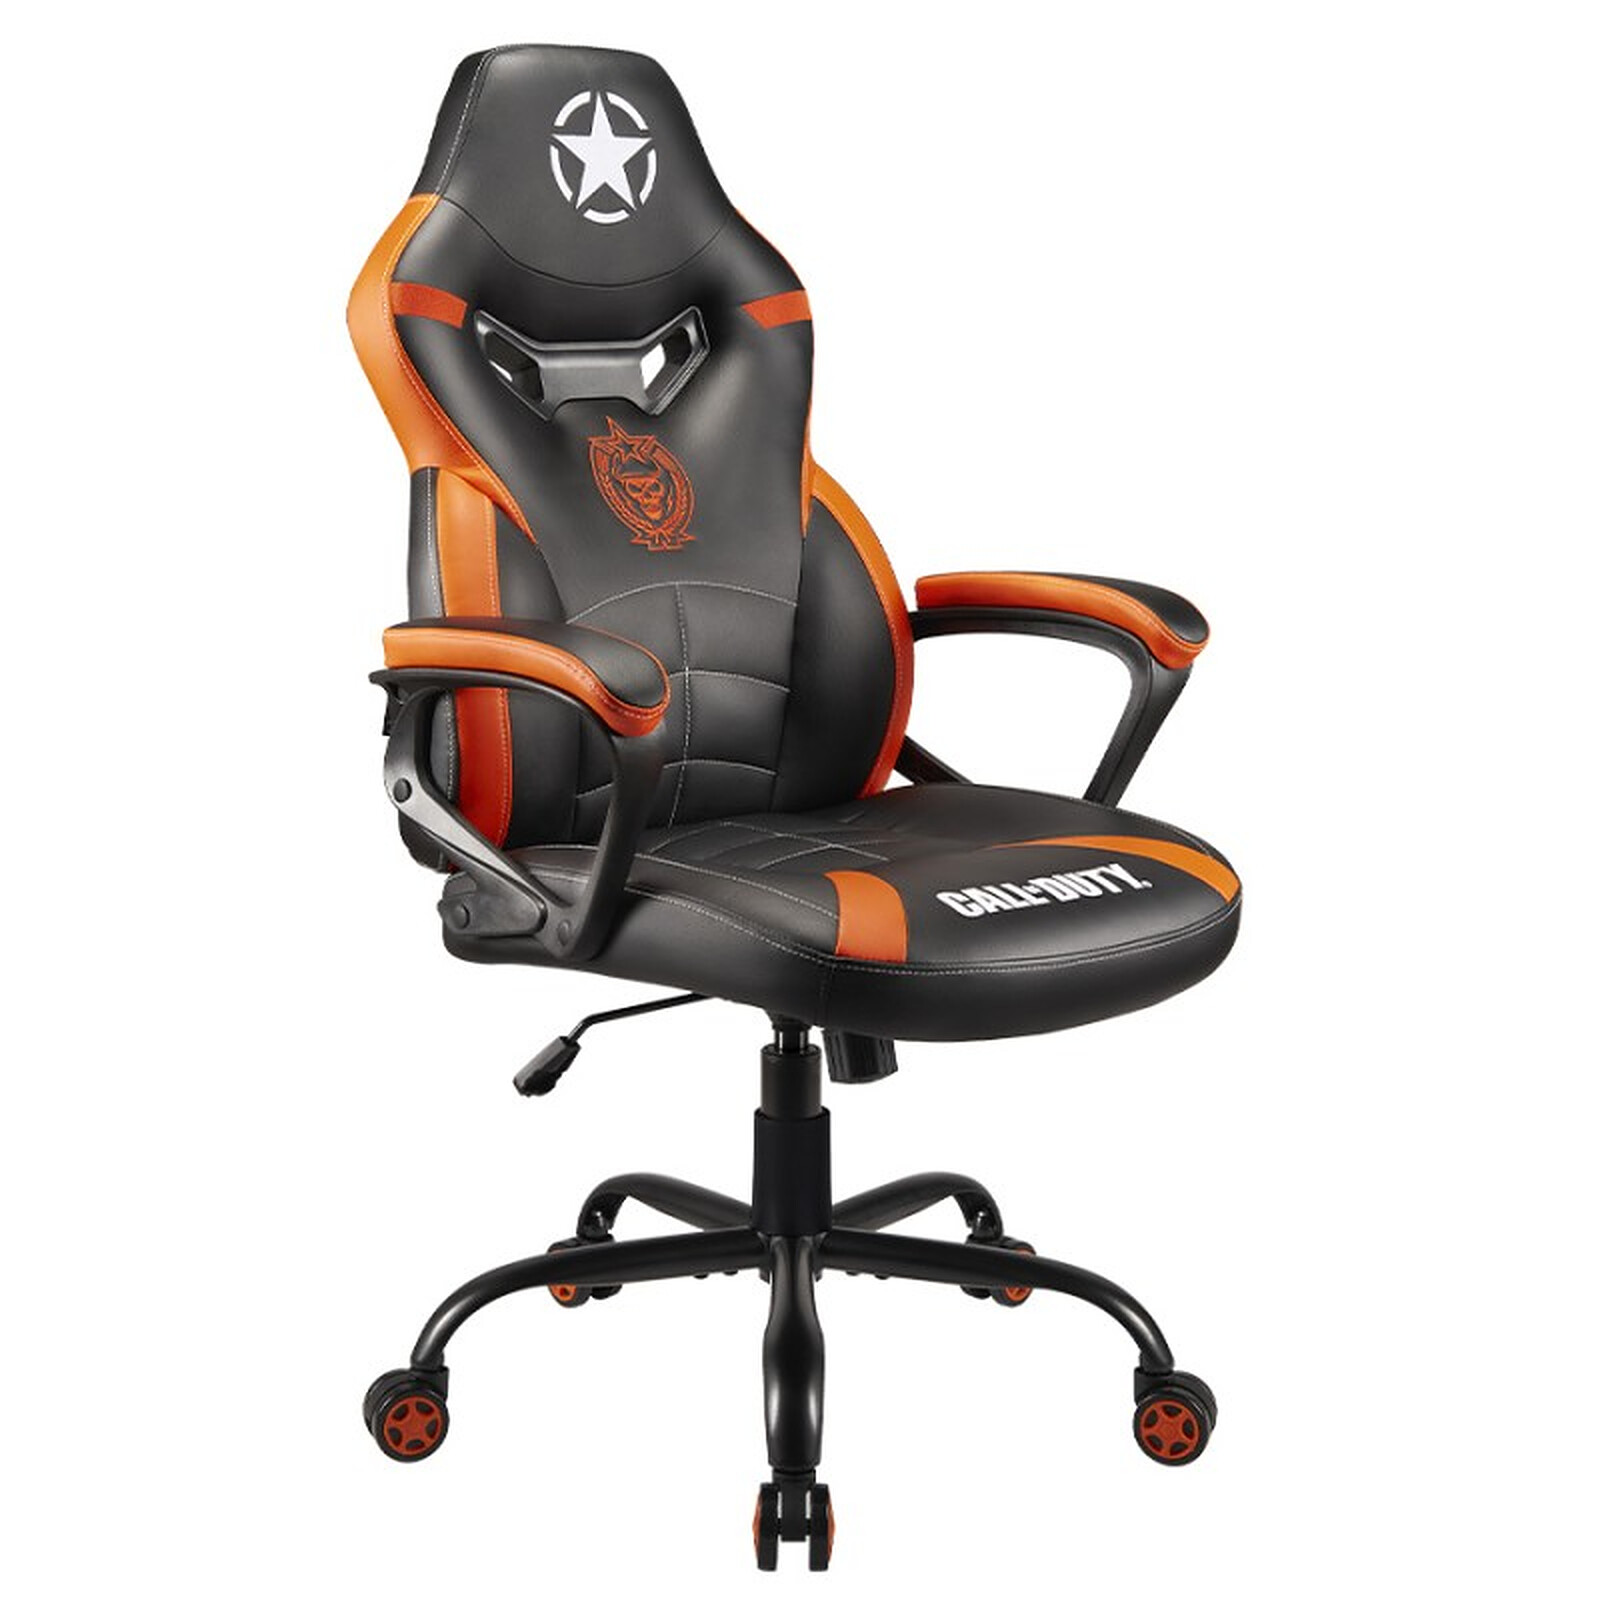 Subsonic Siège COD Call of Duty - Fauteuil gamer - LDLC